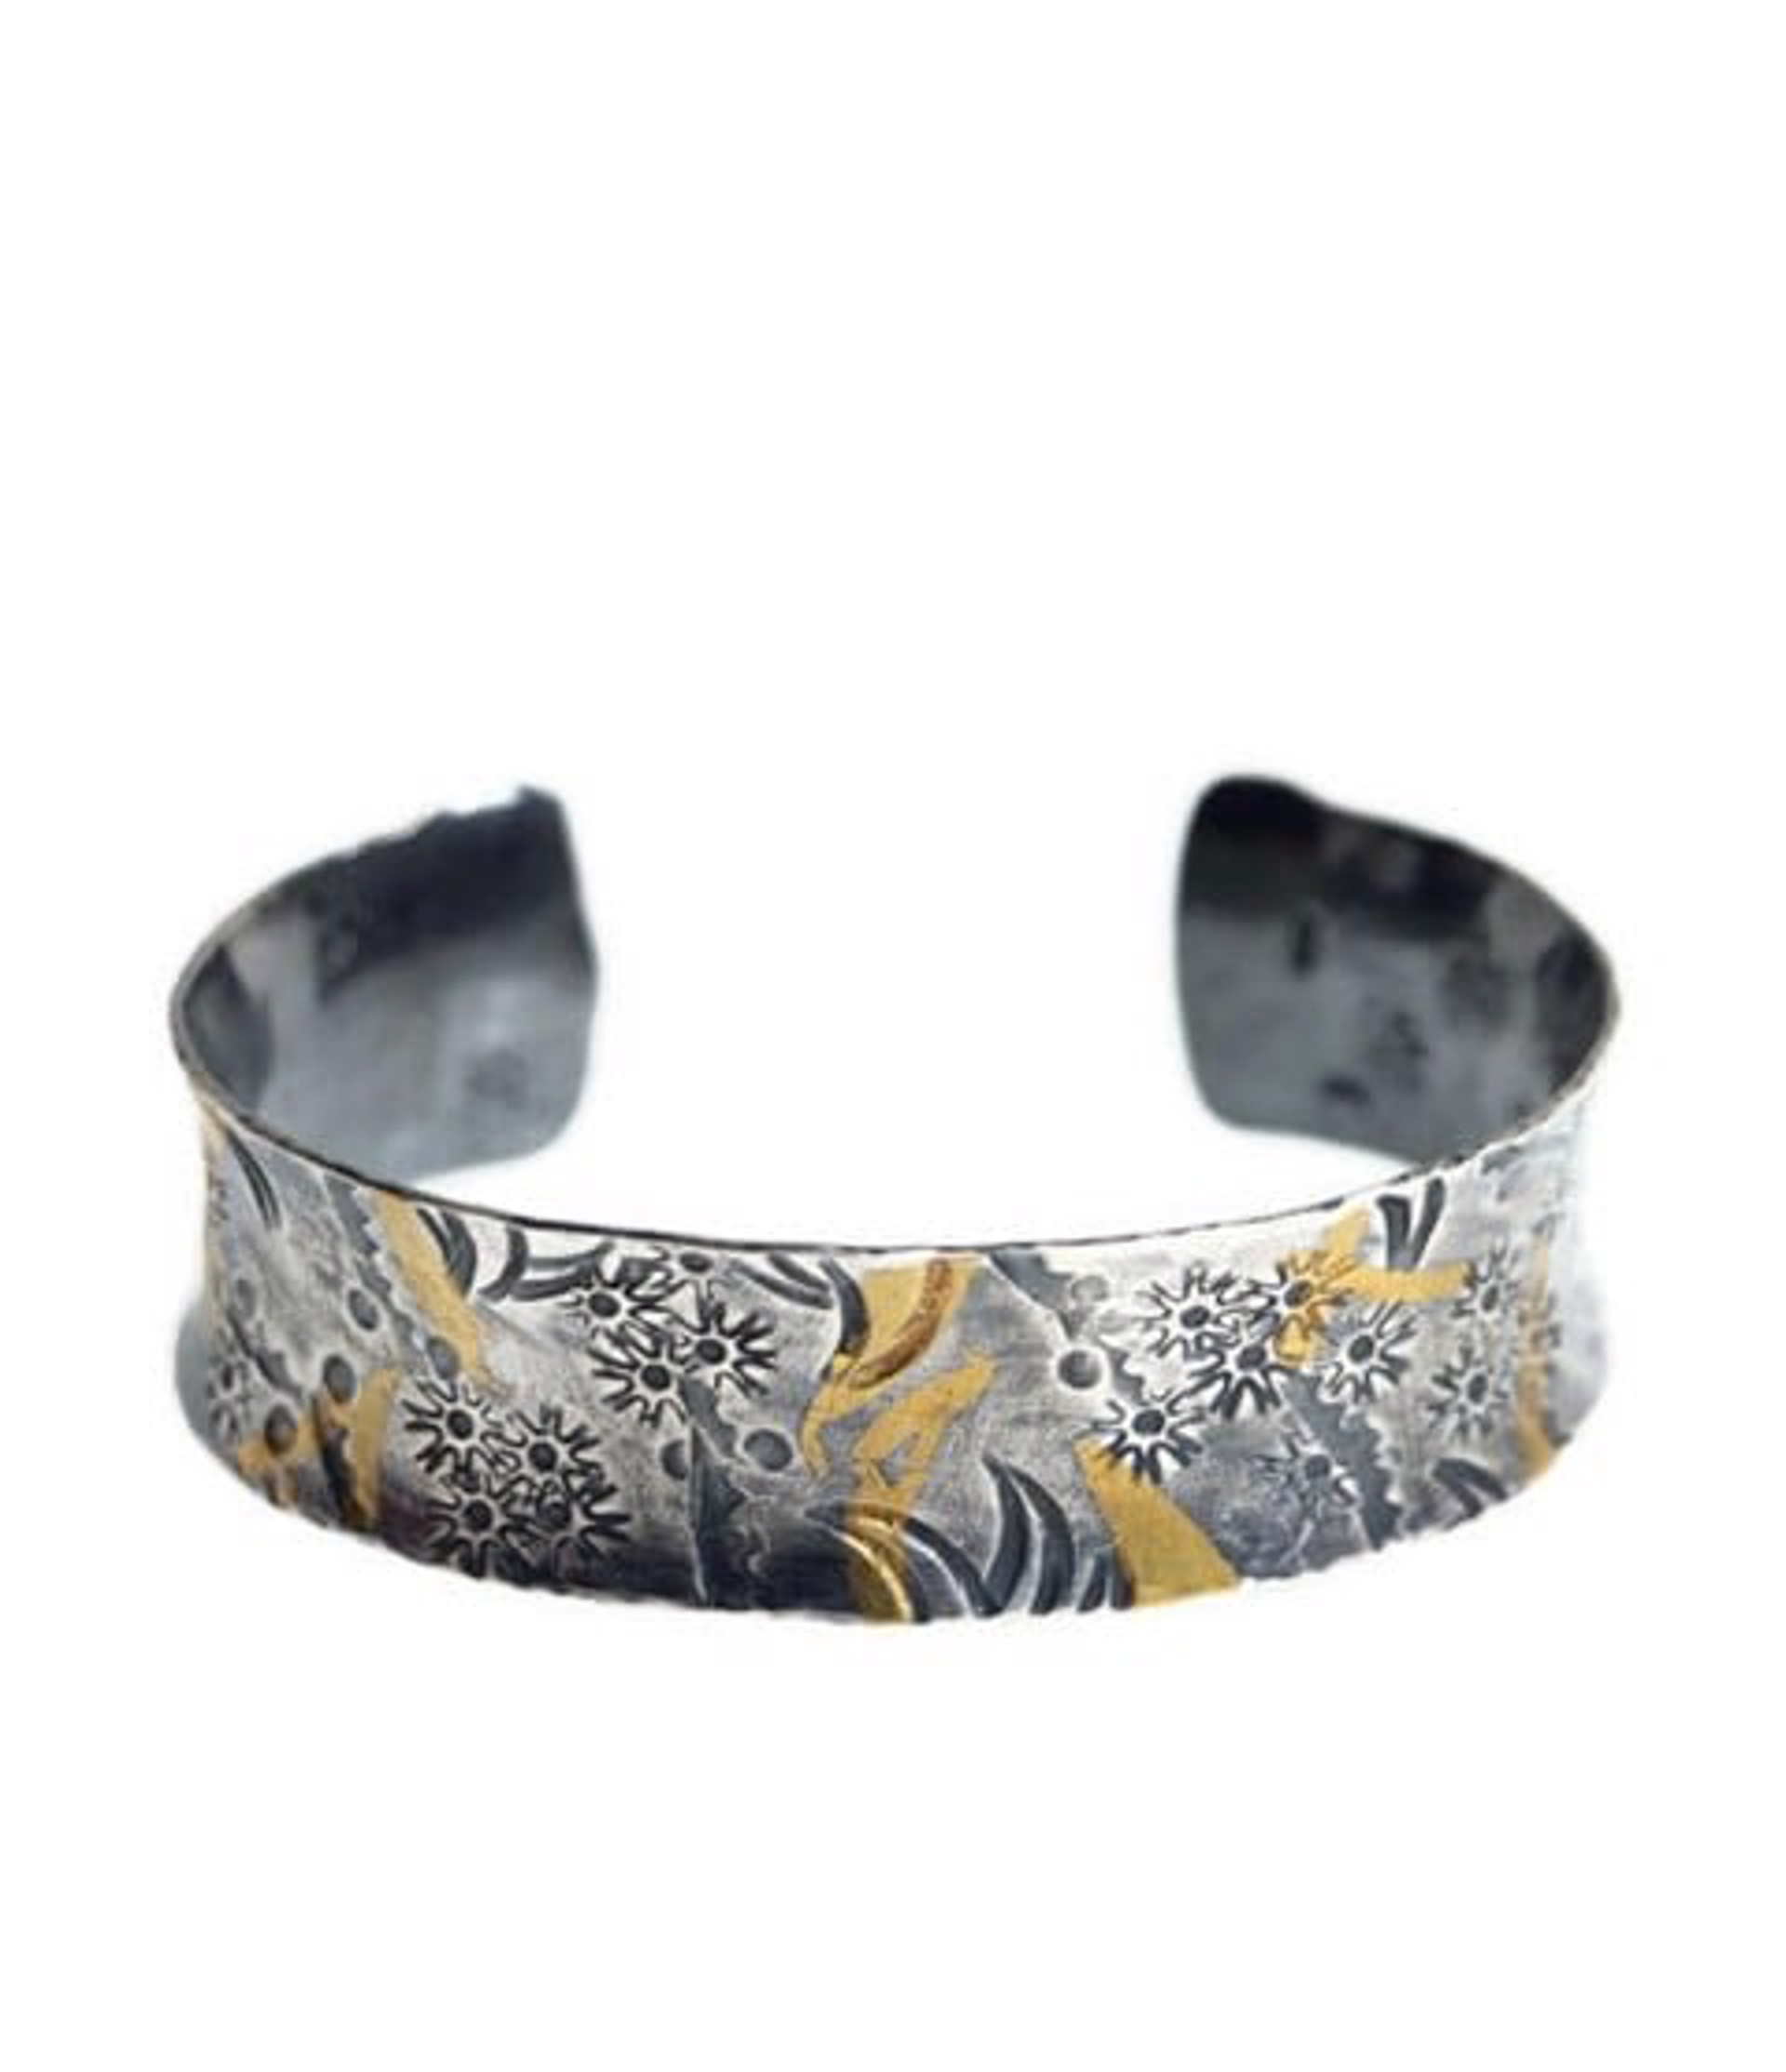 Keum Boo Cuff with Floral Pattern by Karla Hackman